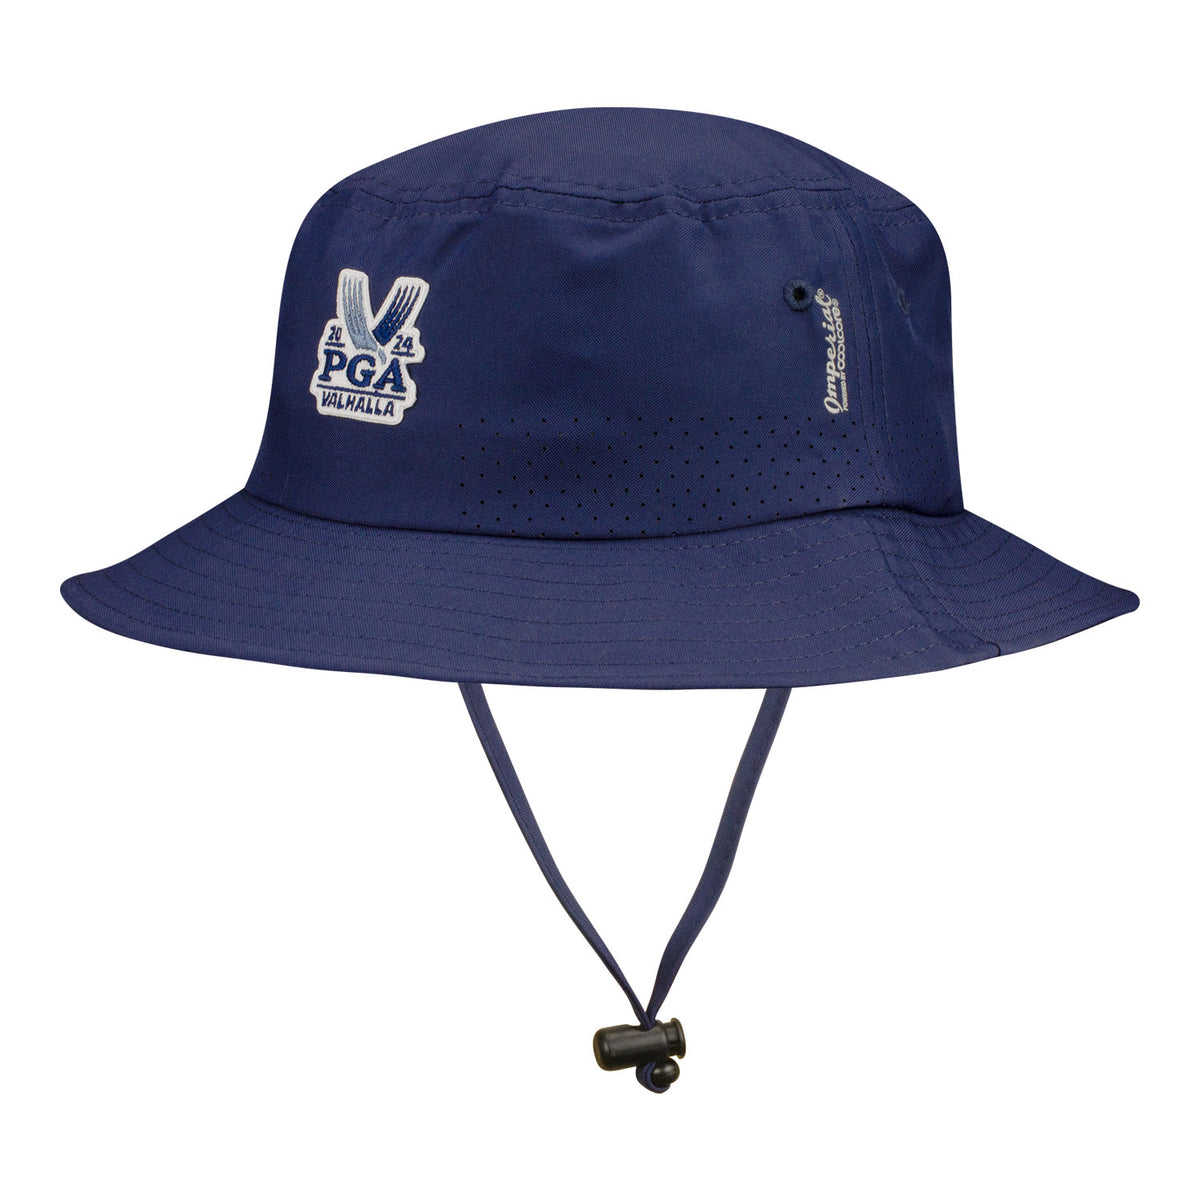 Imperial CC051 - The Geysir Cooling Sun - Protection Bucket in Navy - Front Left View